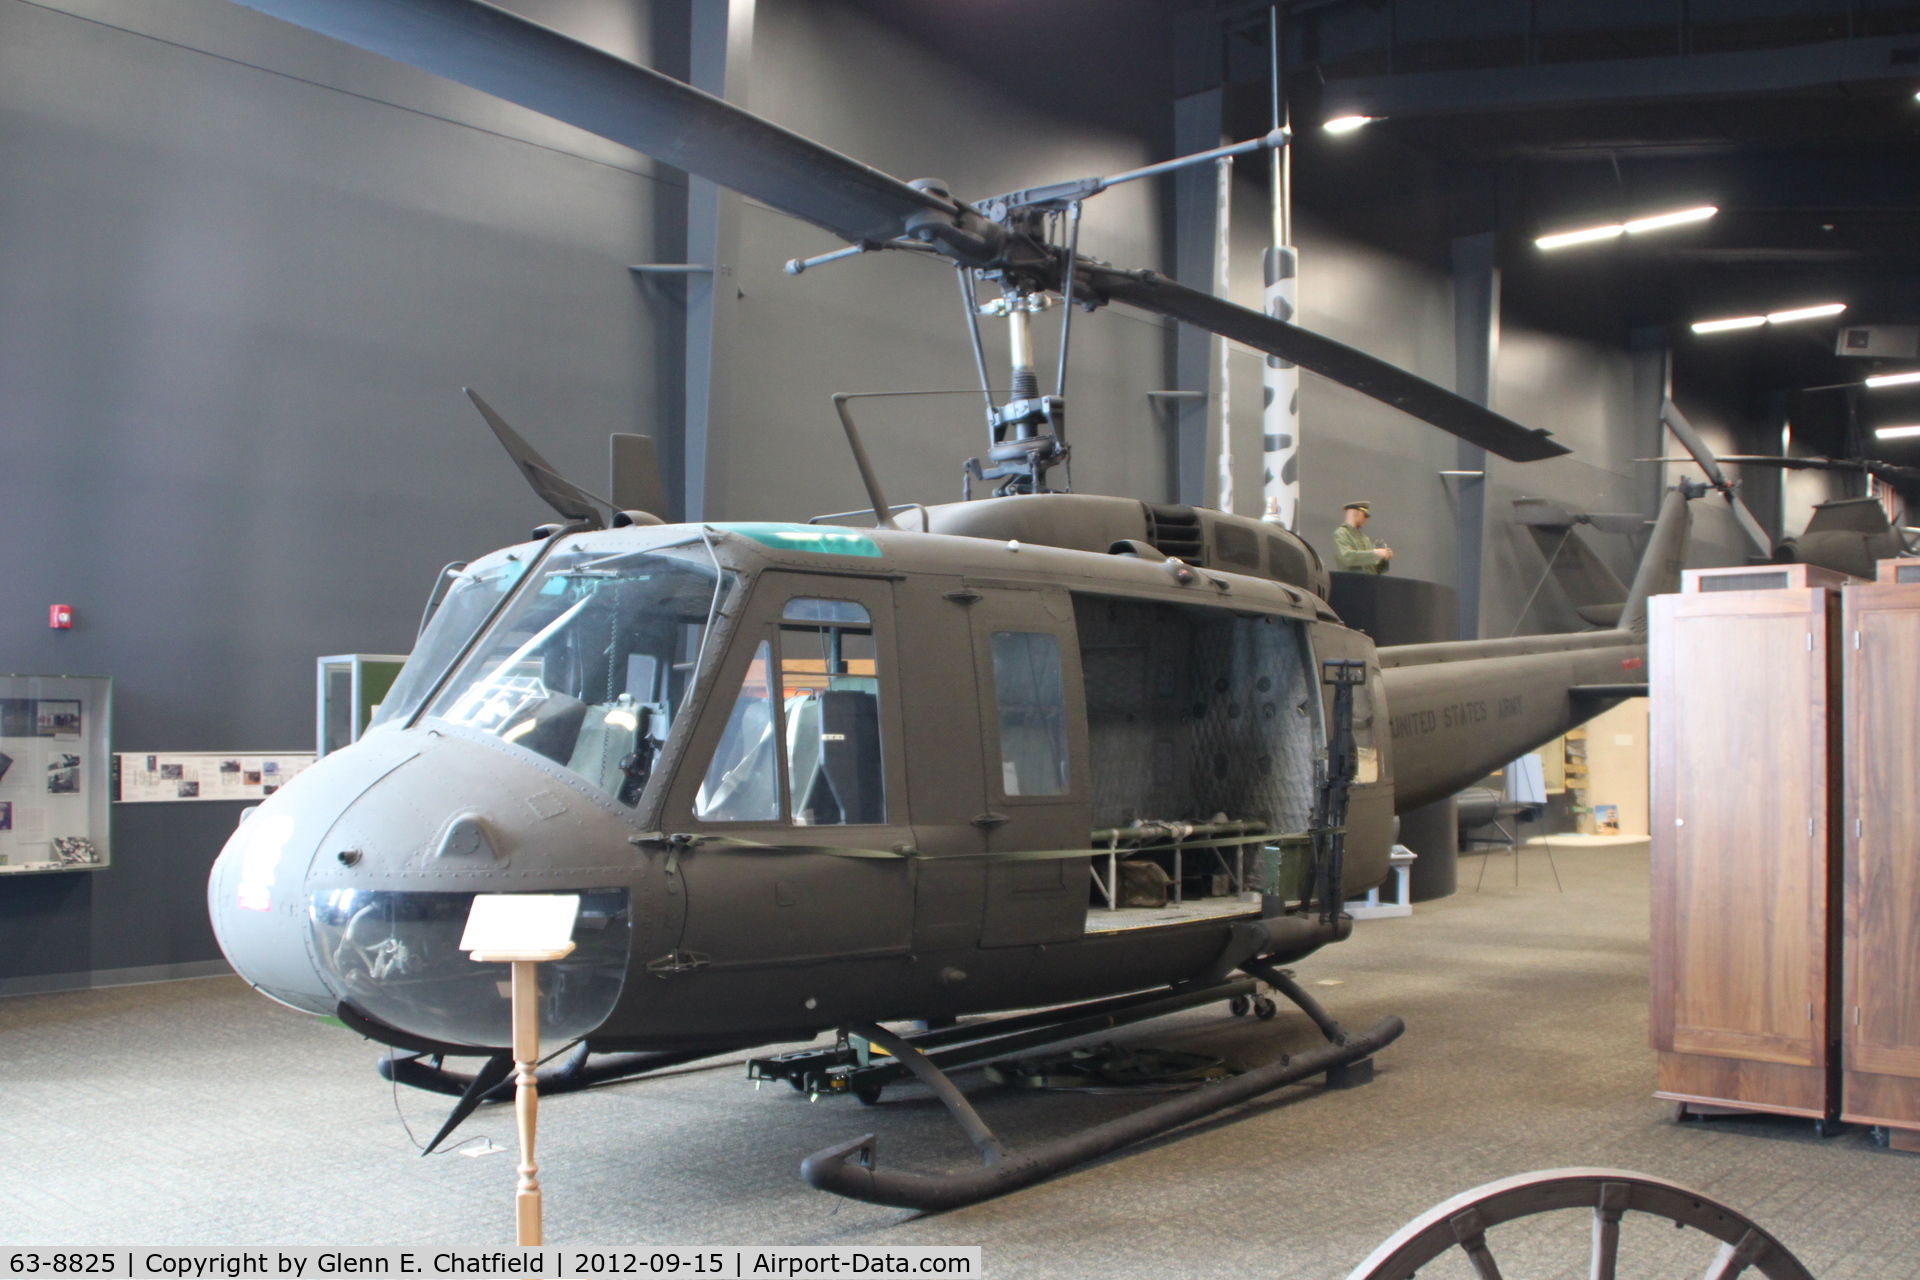 63-8825, 1963 Bell UH-1H Iroquois C/N 4117, At the Iowa Gold Star Military Museum